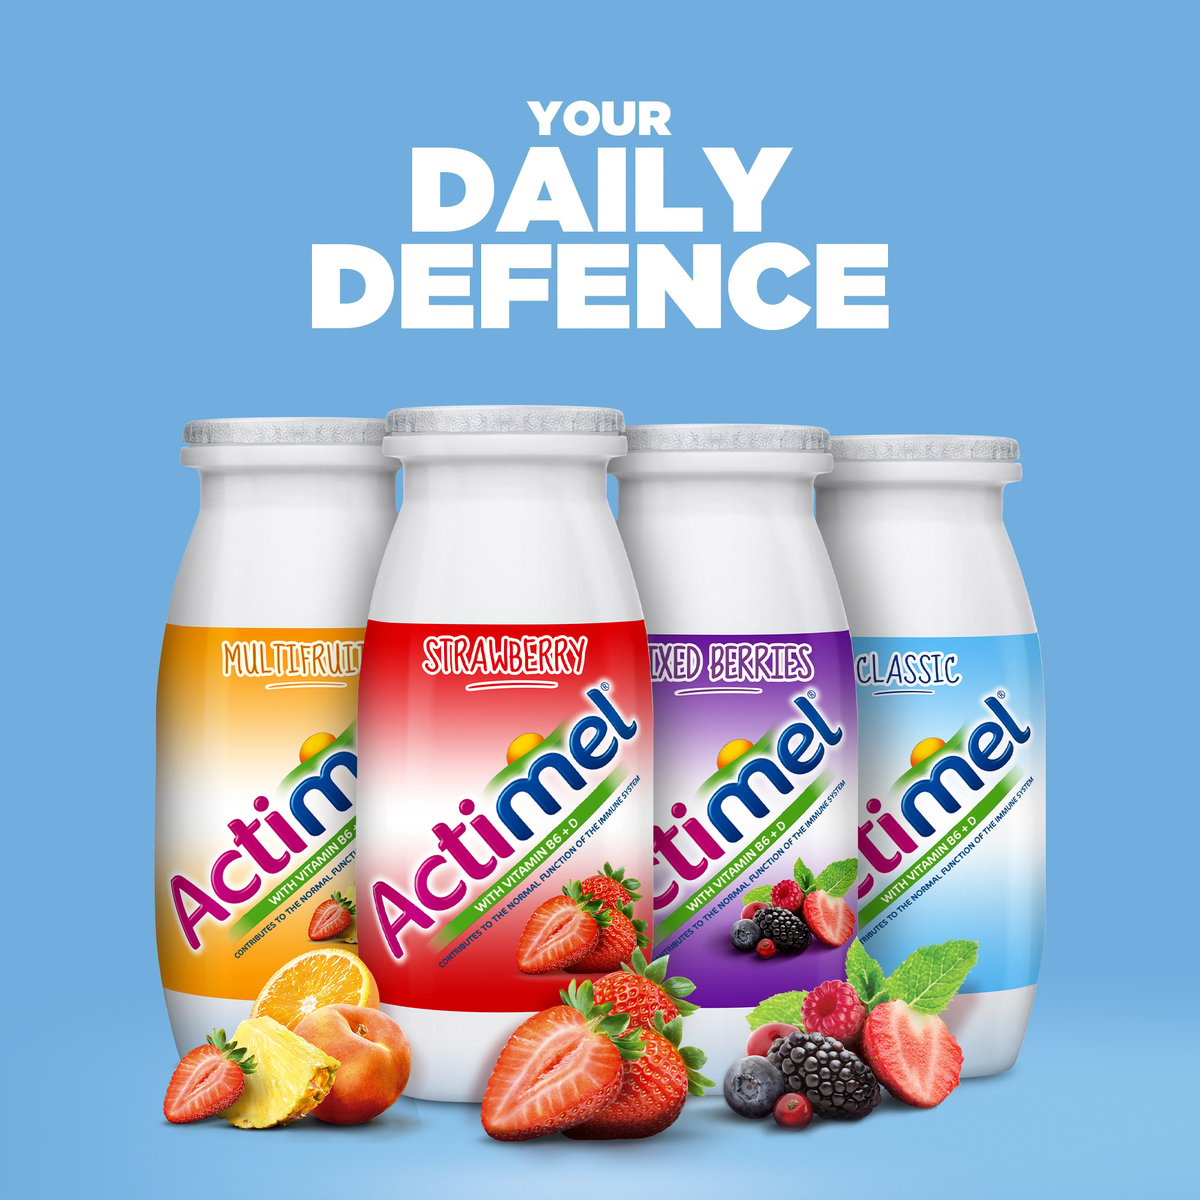 Actimel Multi-Fruit Flavored Low Fat Dairy Drink 93 ml 6+2